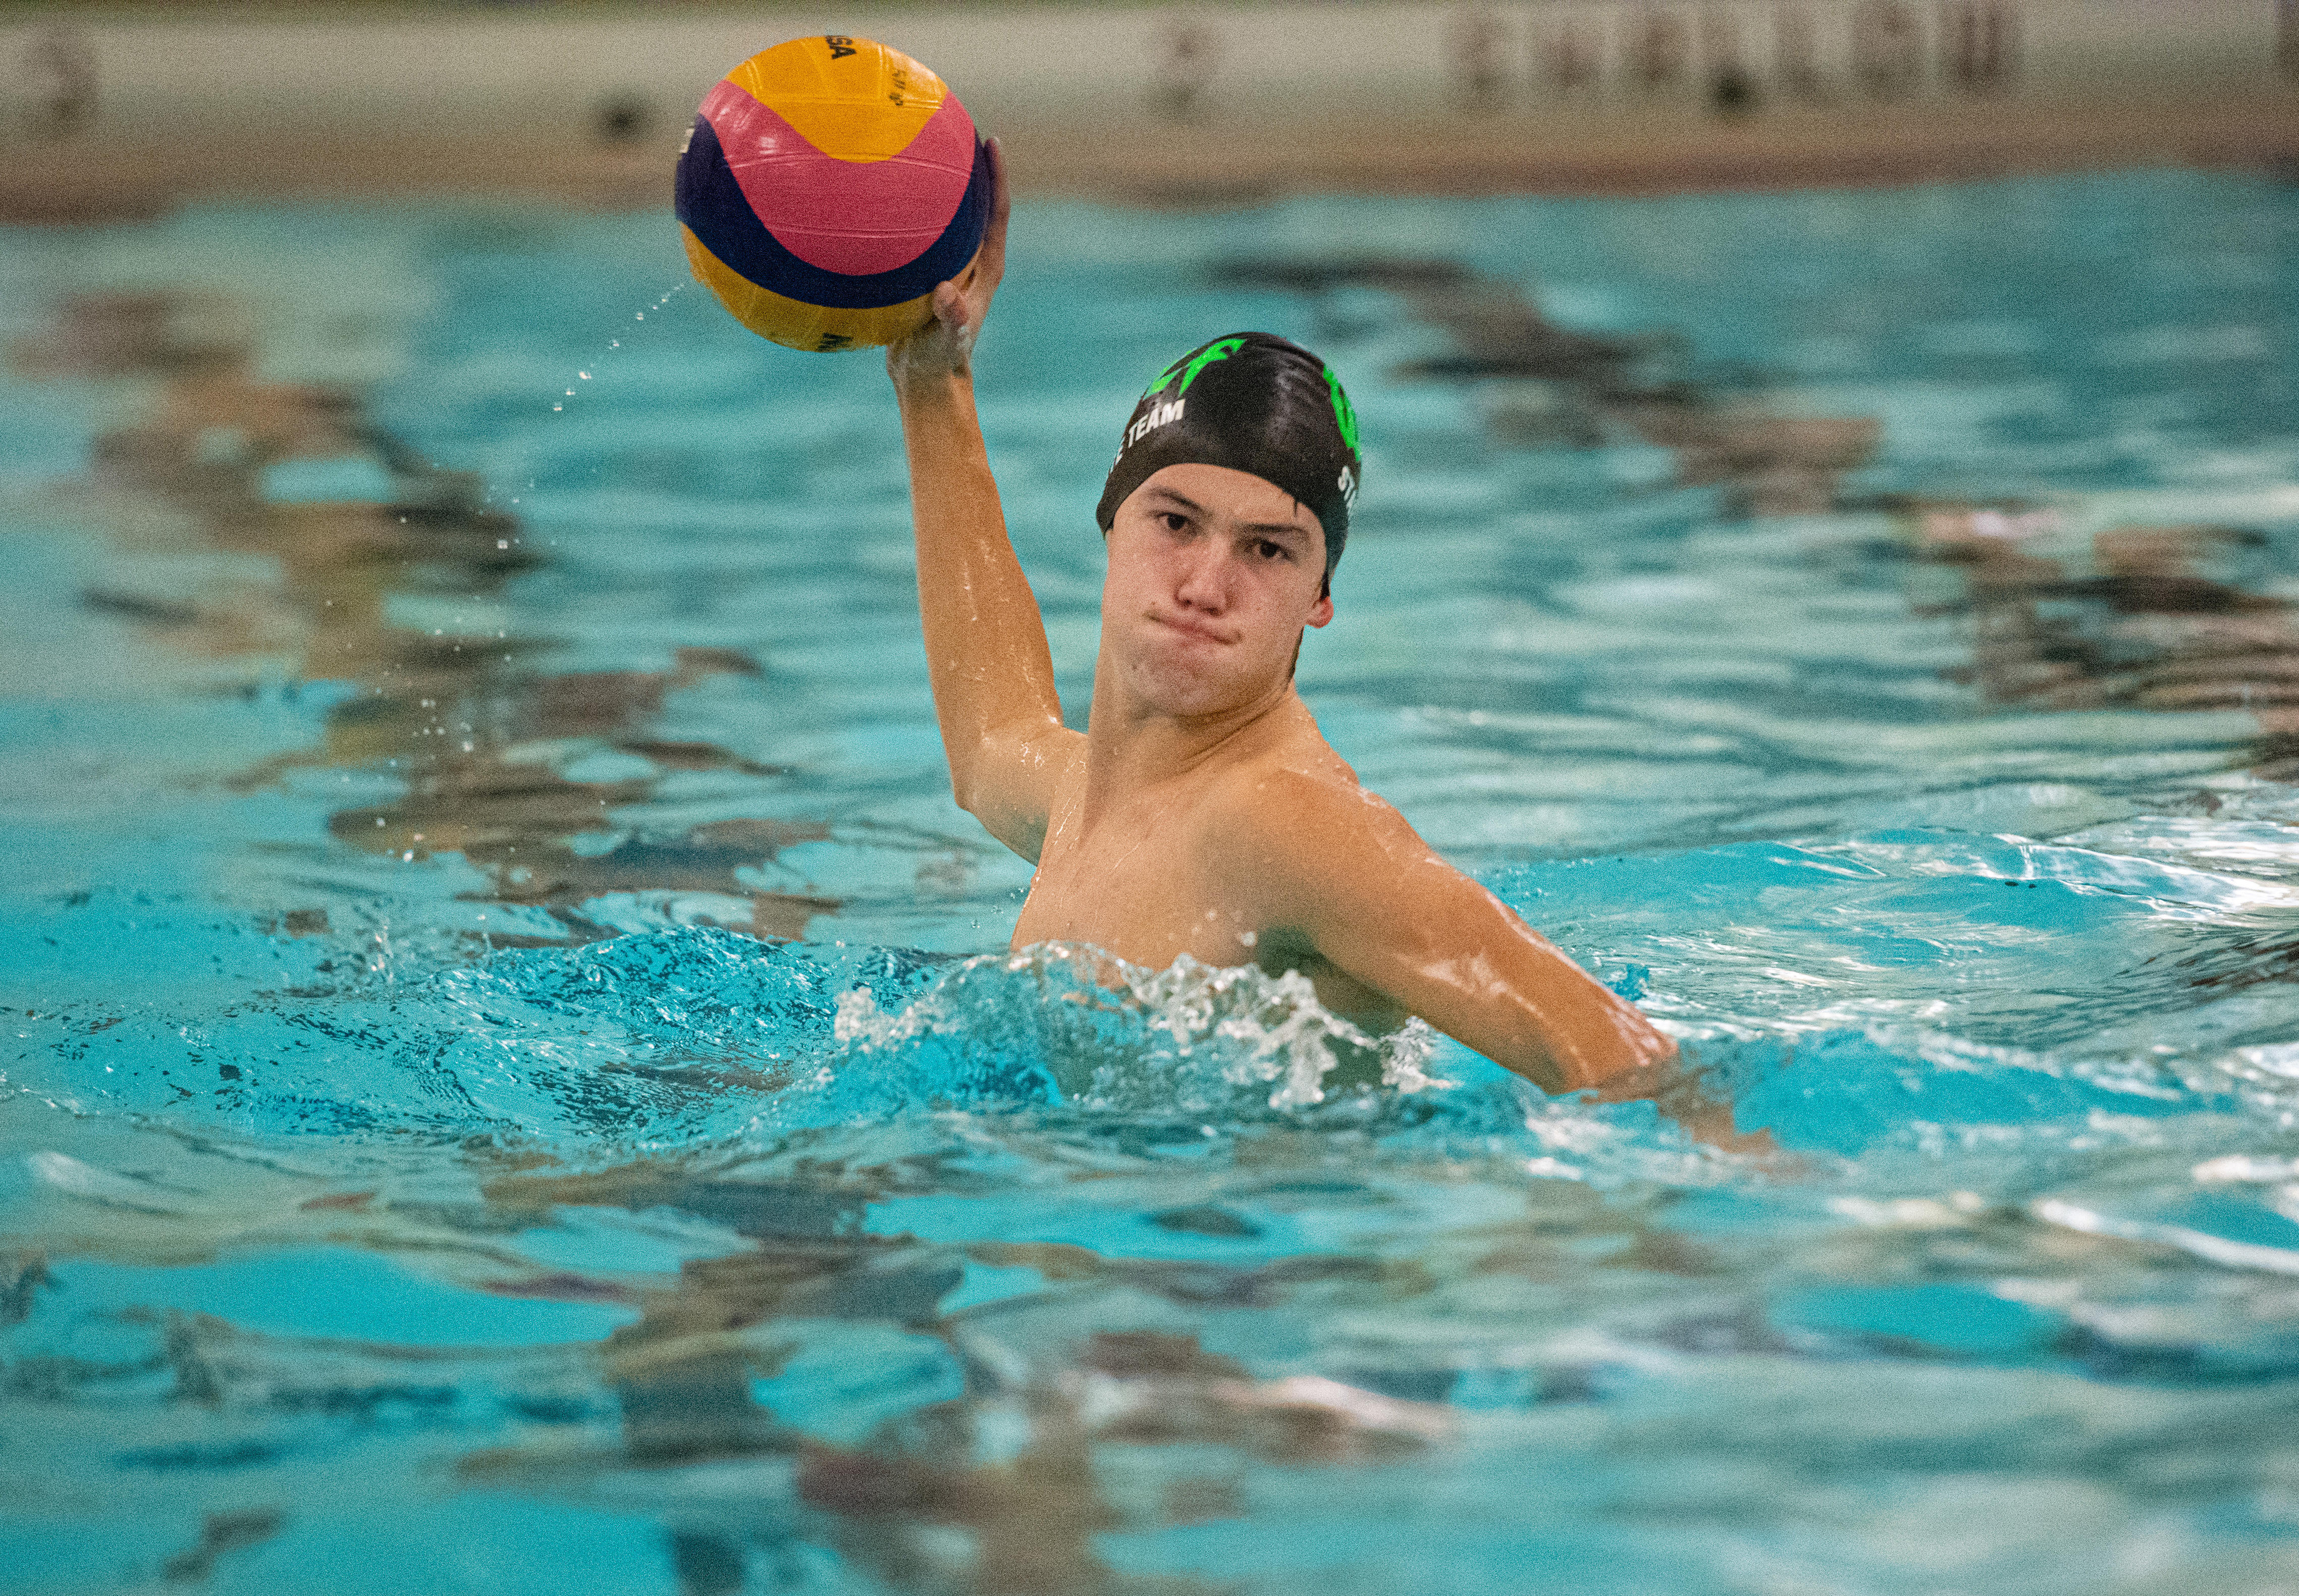 Freshman Robbie playing water polo in UMD's pool